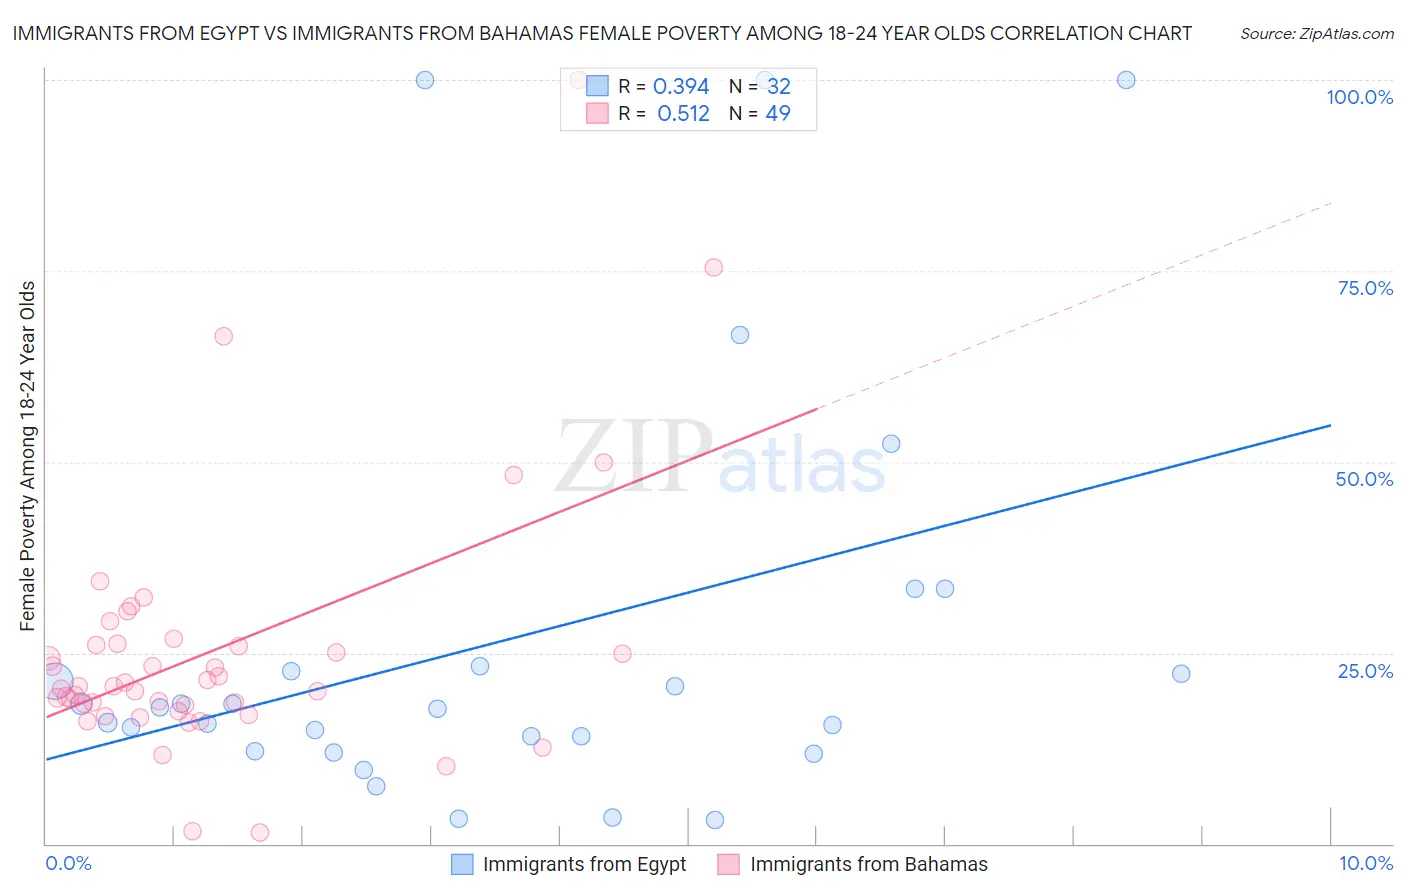 Immigrants from Egypt vs Immigrants from Bahamas Female Poverty Among 18-24 Year Olds